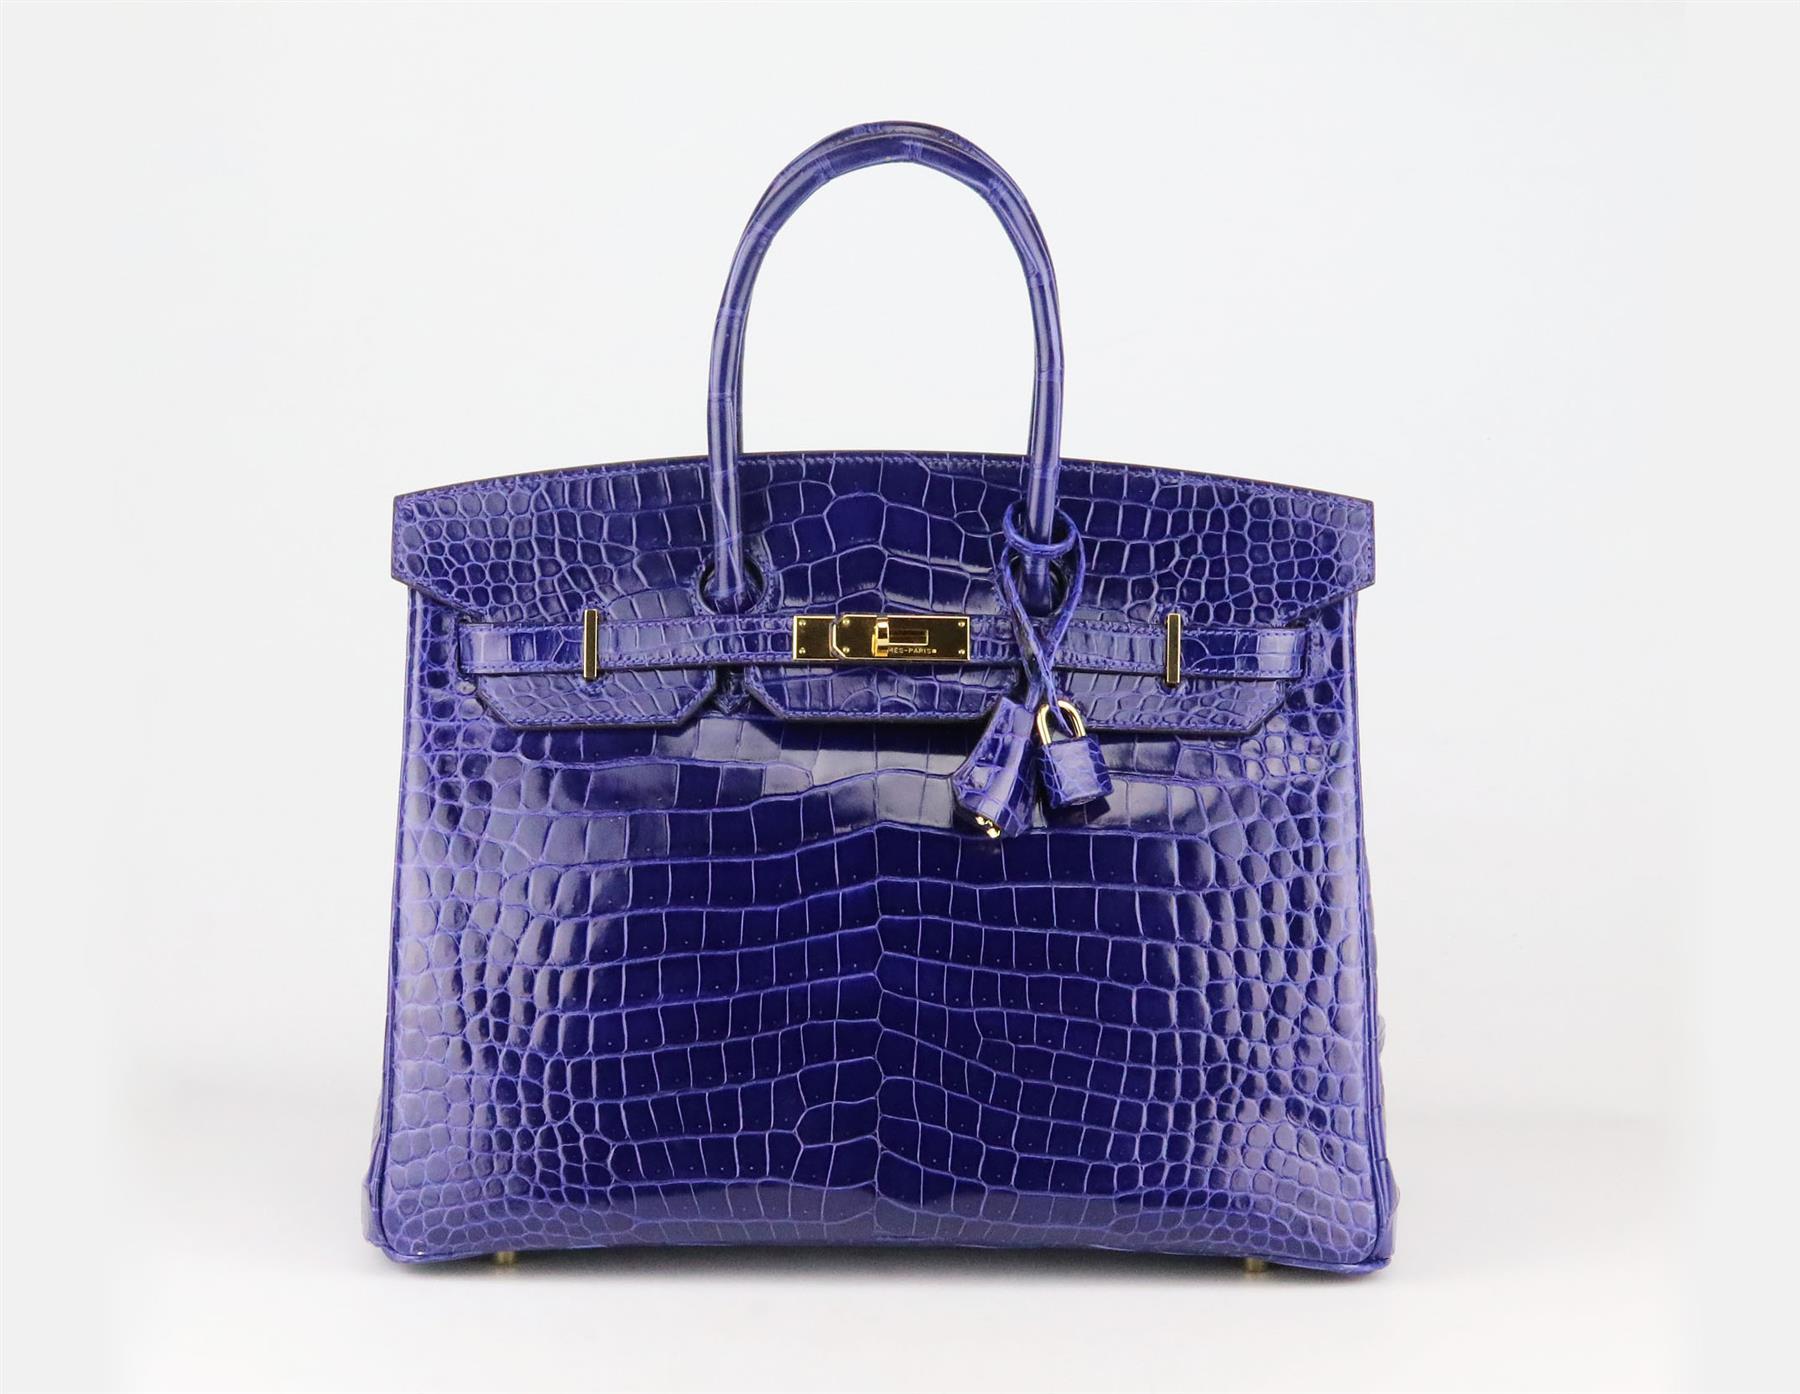 <ul>
<li>Made in France, this beautiful 2014 Hermès ‘Birkin’ 35cm handbag has been made from shiny Porosus Crocodile exterior in ‘Royal Blue’ and matching leather interior, this piece is decorated with gold hardware on the front and finished with